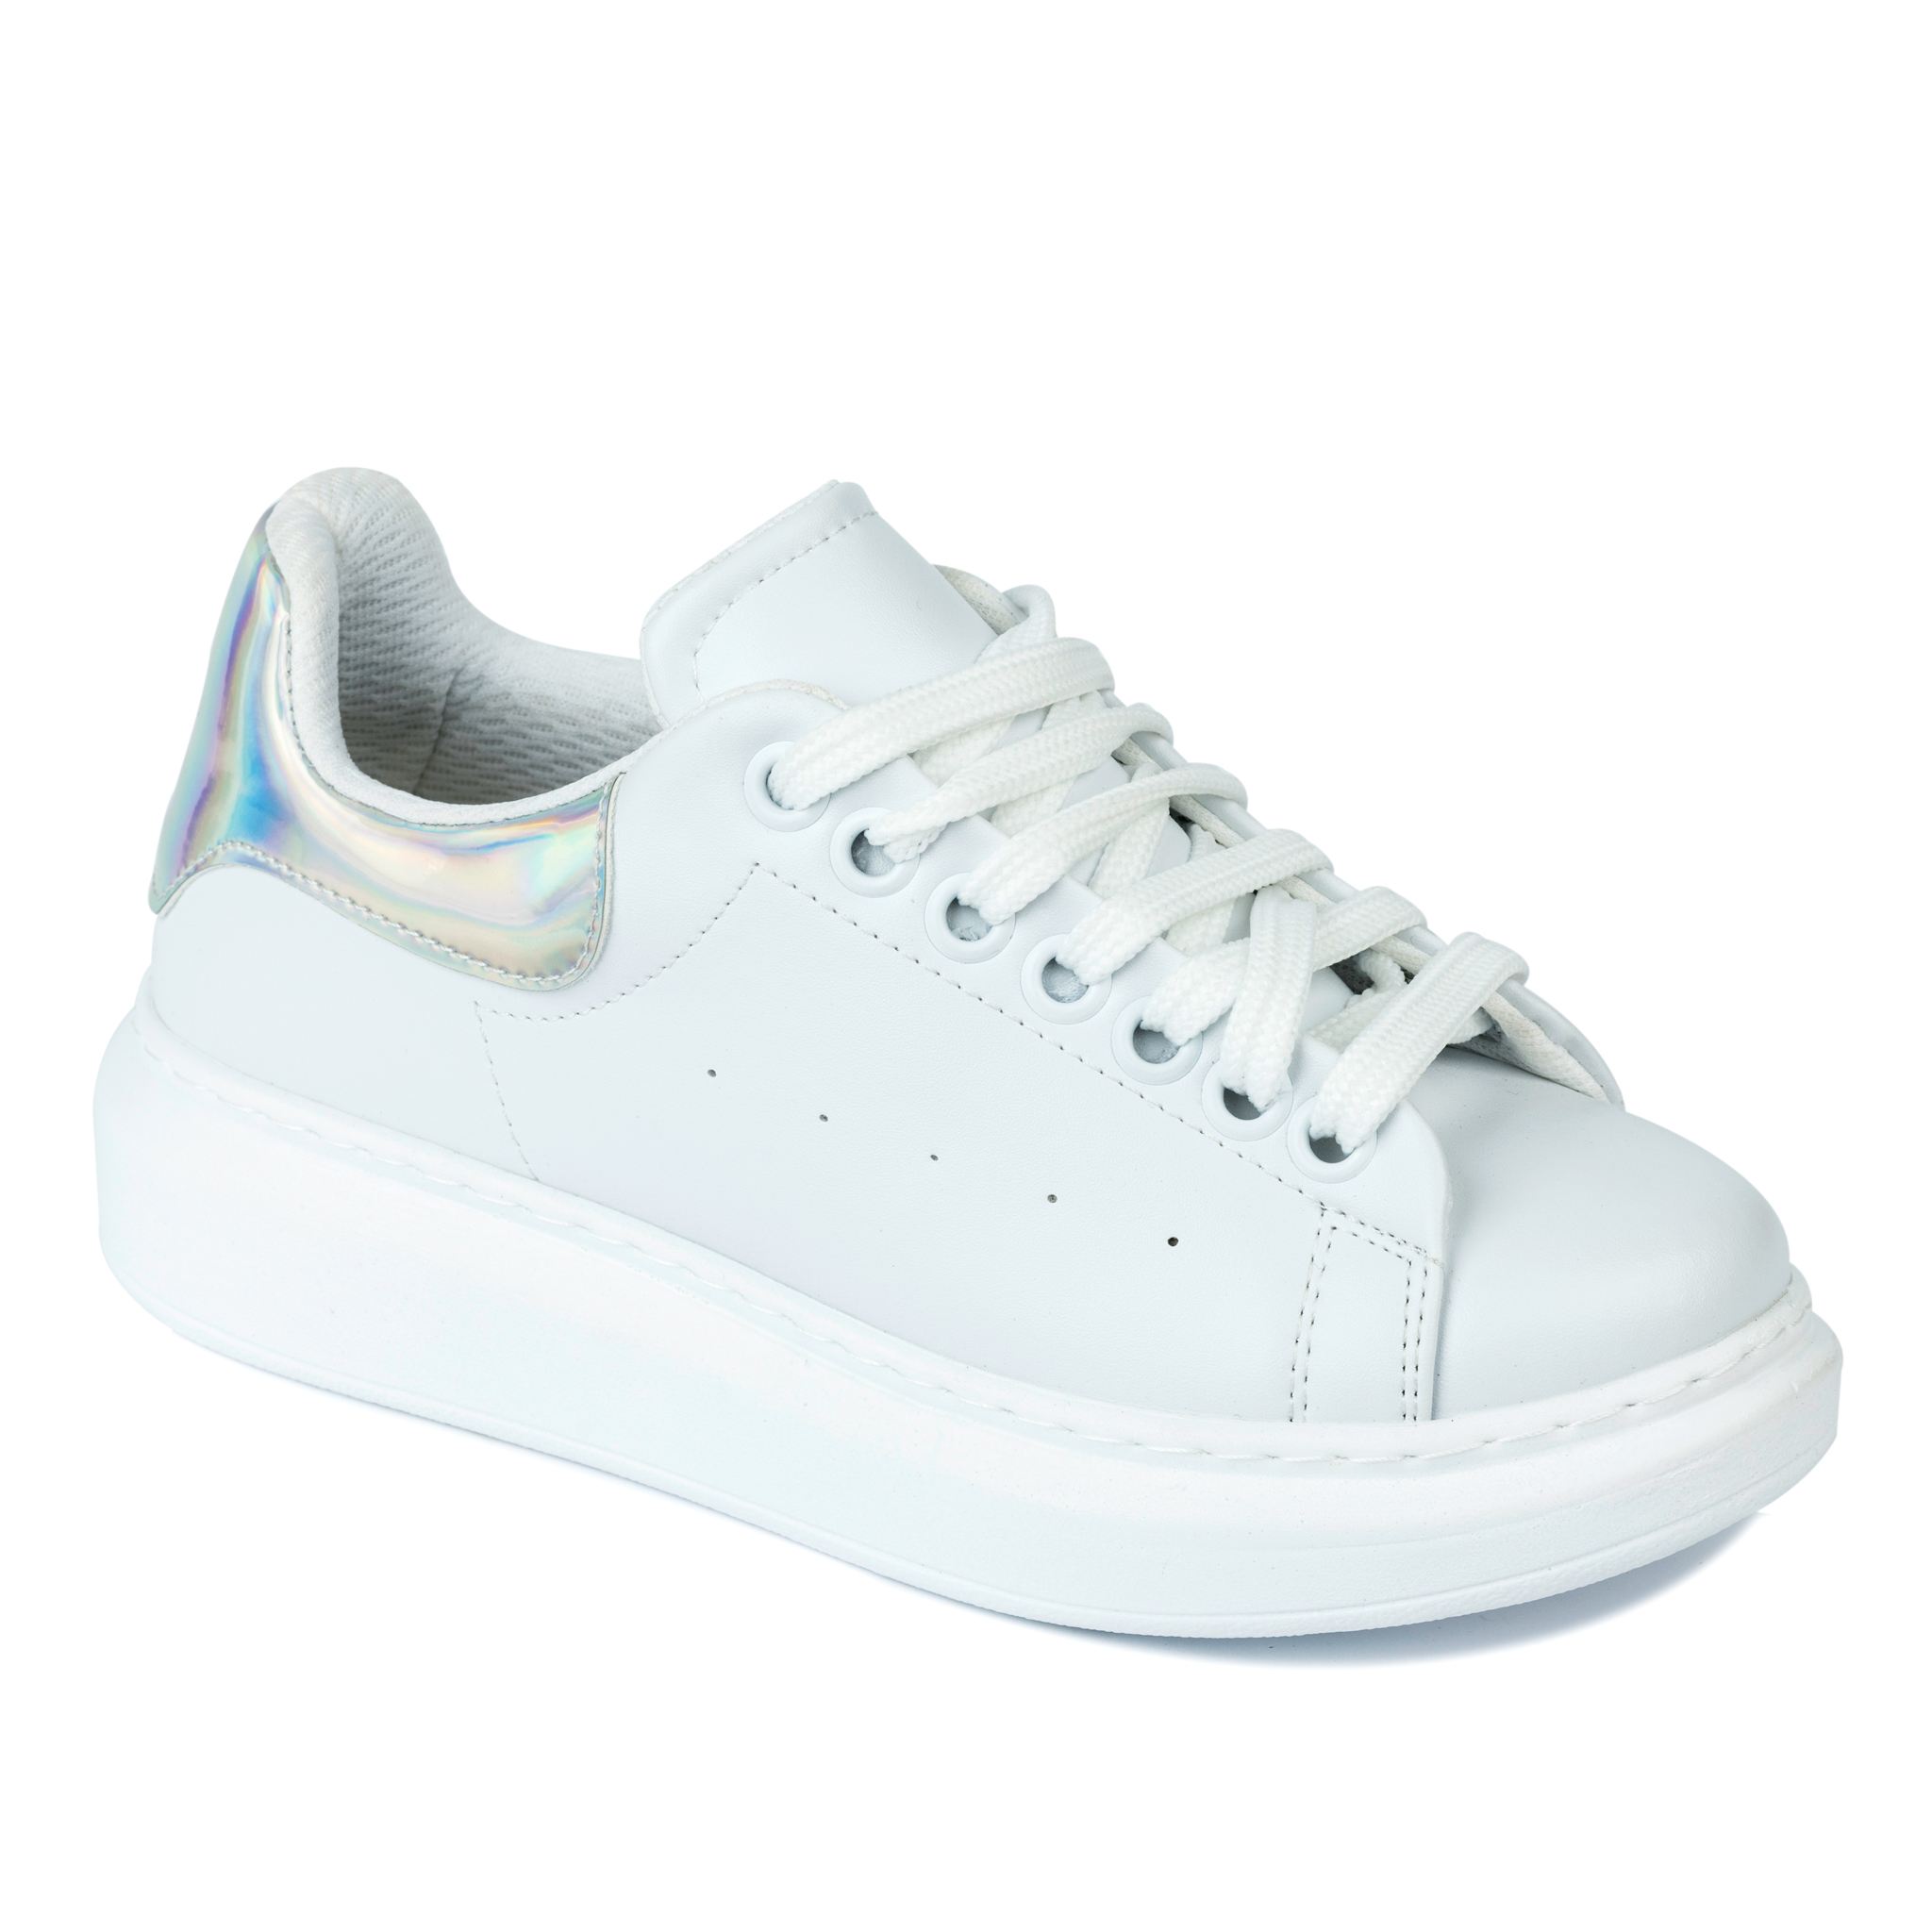 HOLOGRAM HIGH SOLE SNEAKERS - WHITE